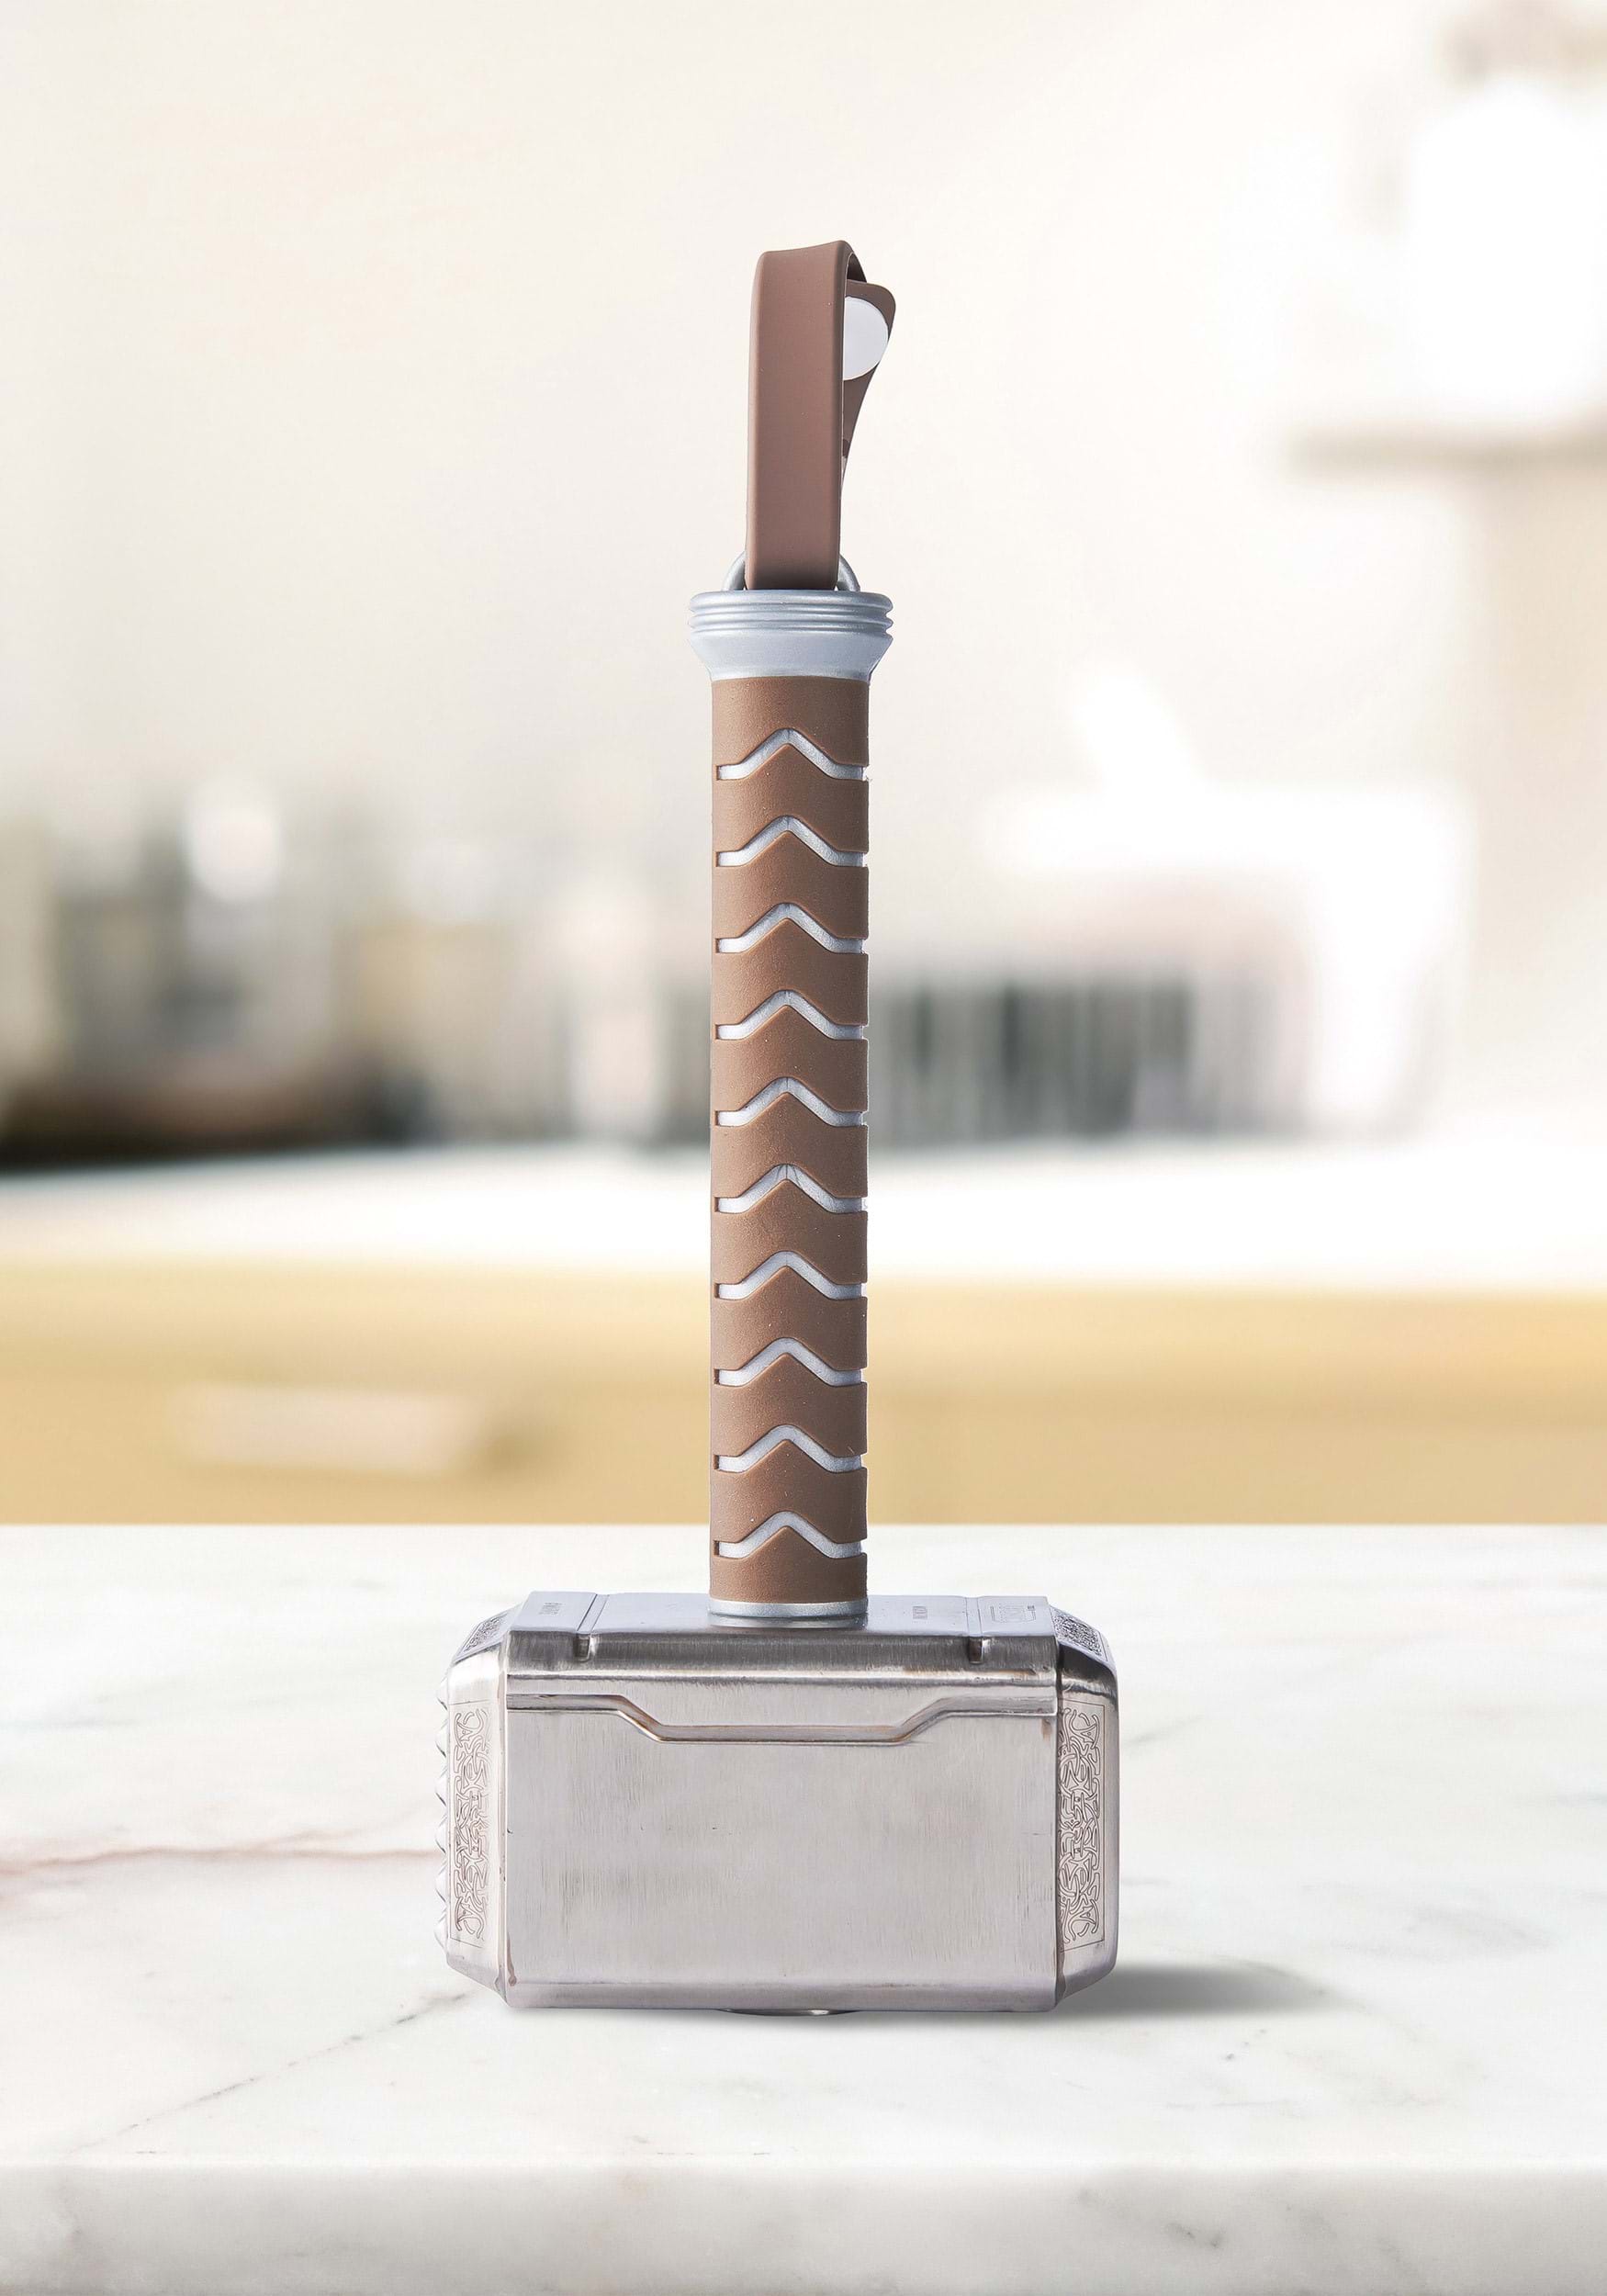 https://images.fun.com/products/89796/2-1-256564/marvel-thor-meat-tenderizer-alt-3.jpg